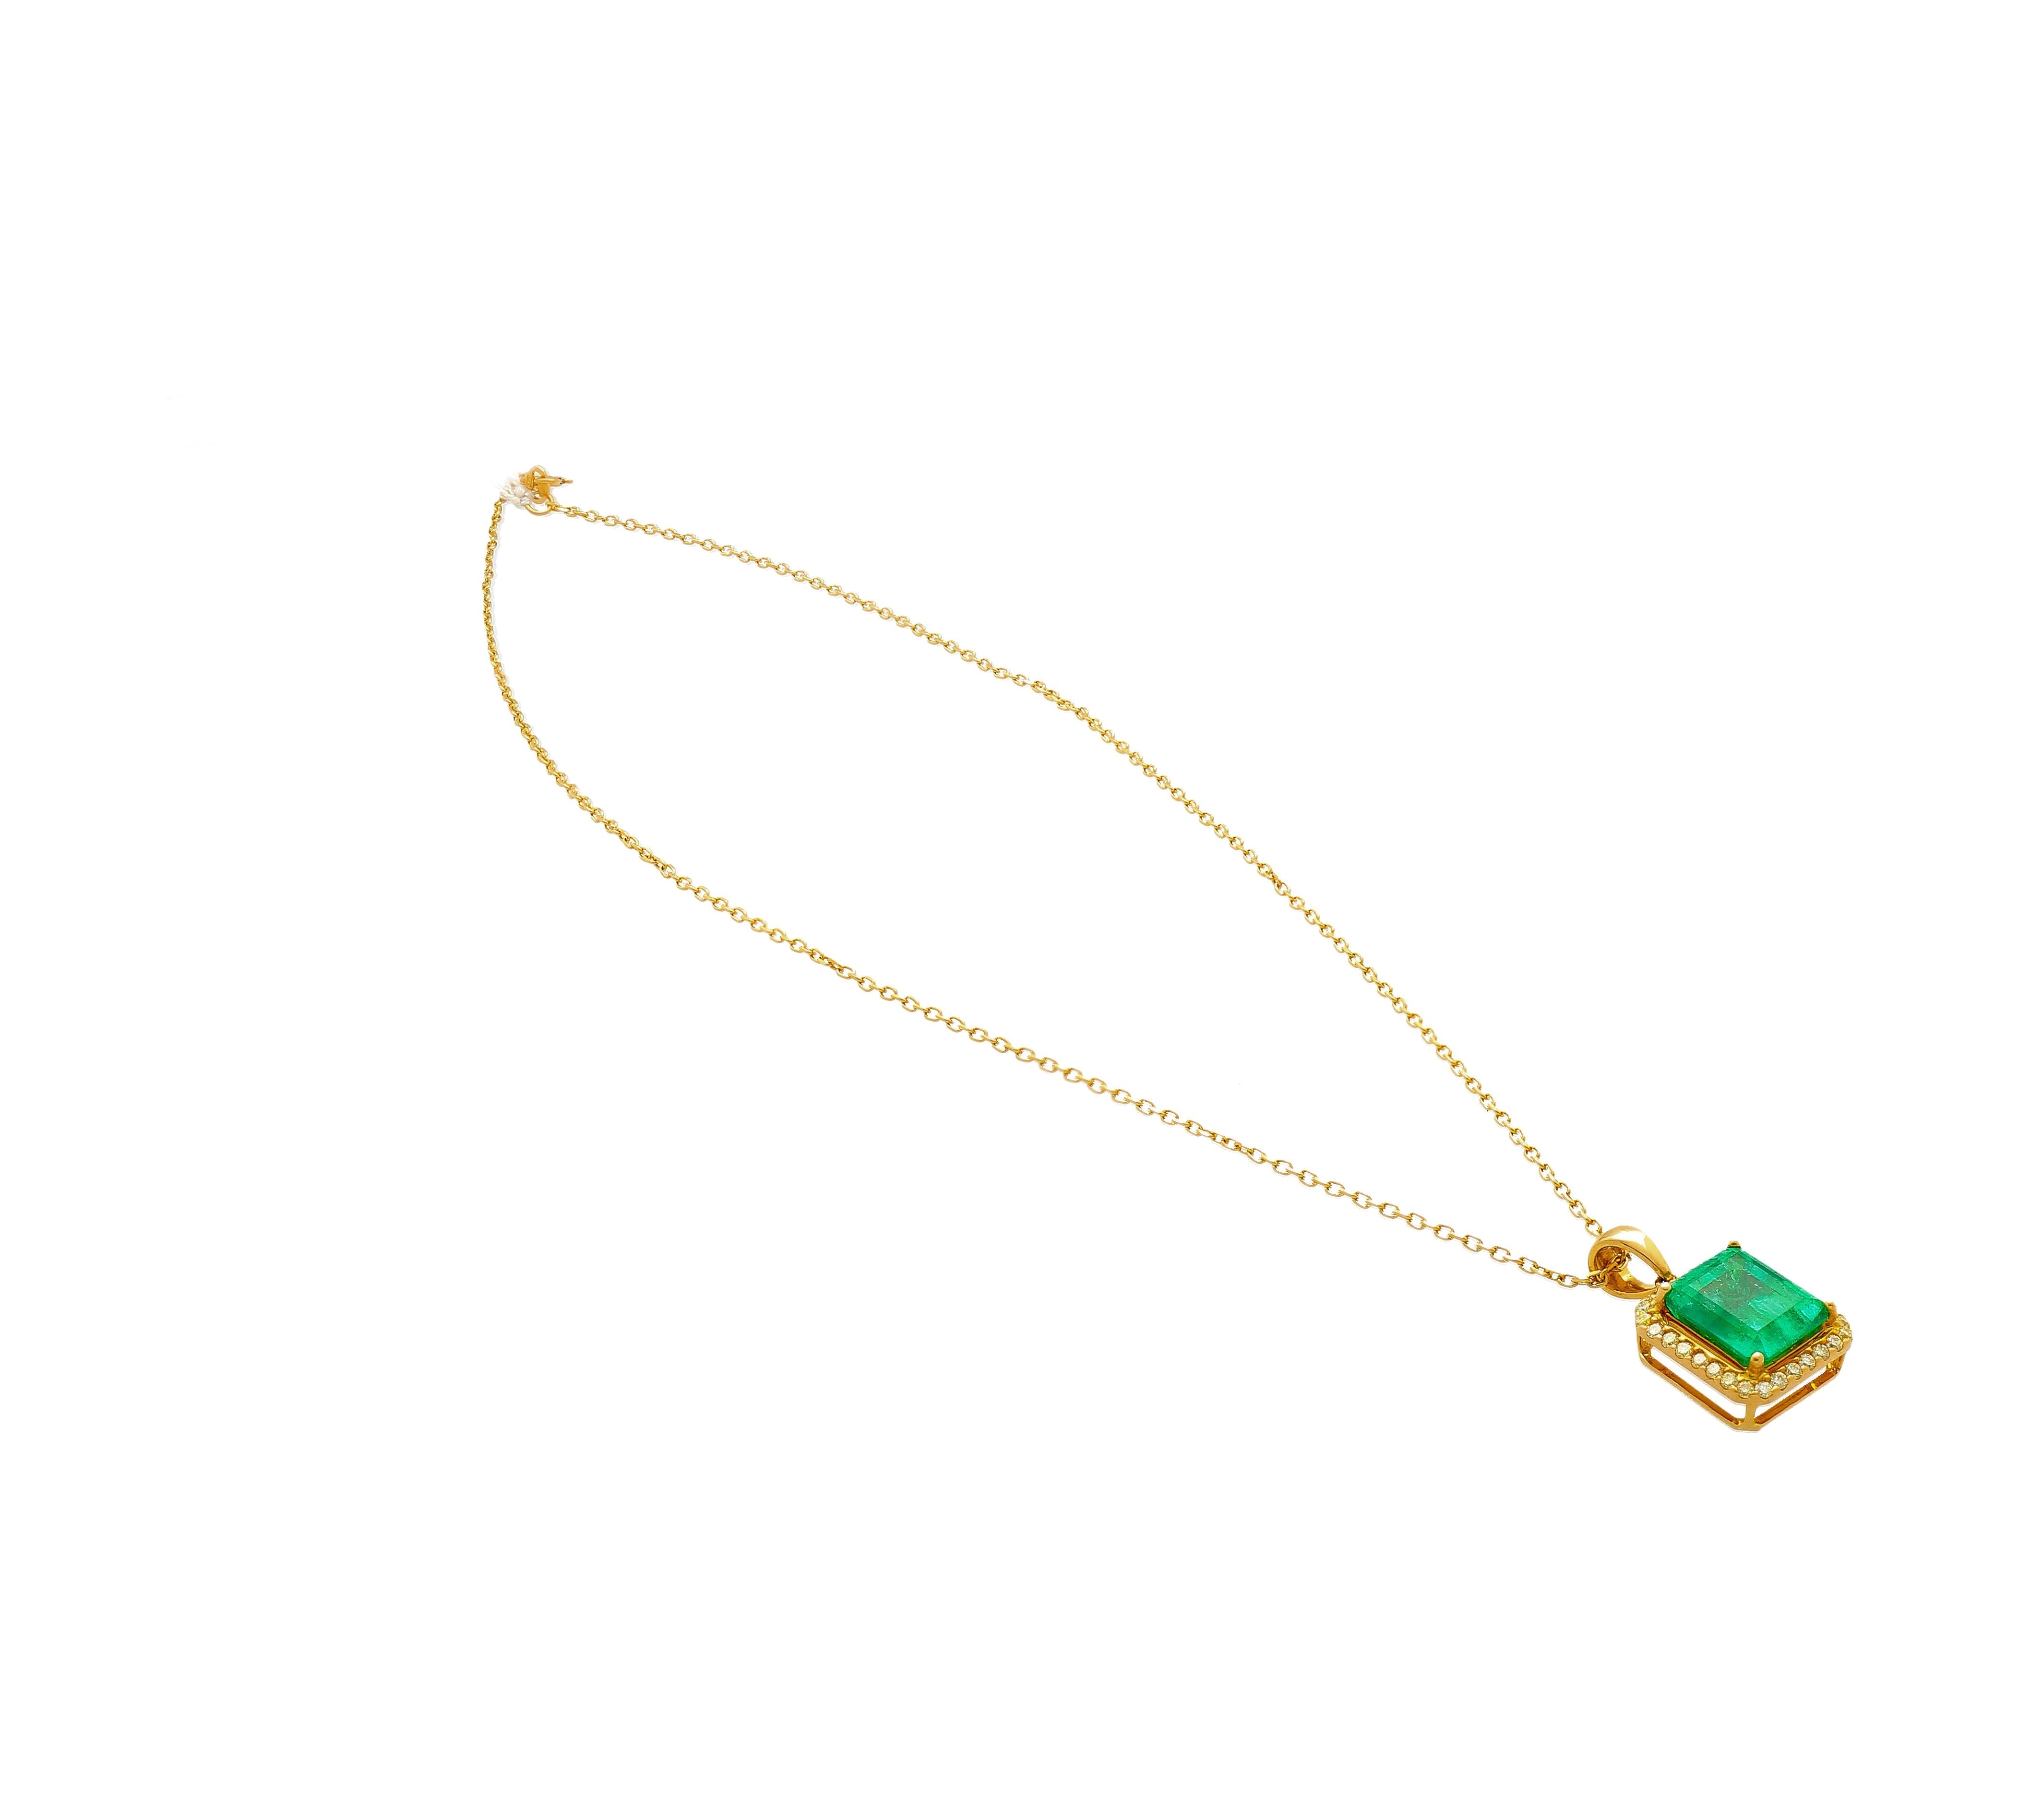 5_42-Carat-Natural-Emerald-Pendant-Necklace-with-Yellow-Diamond-Halo-in-18k-Gold-Necklace-2.jpg